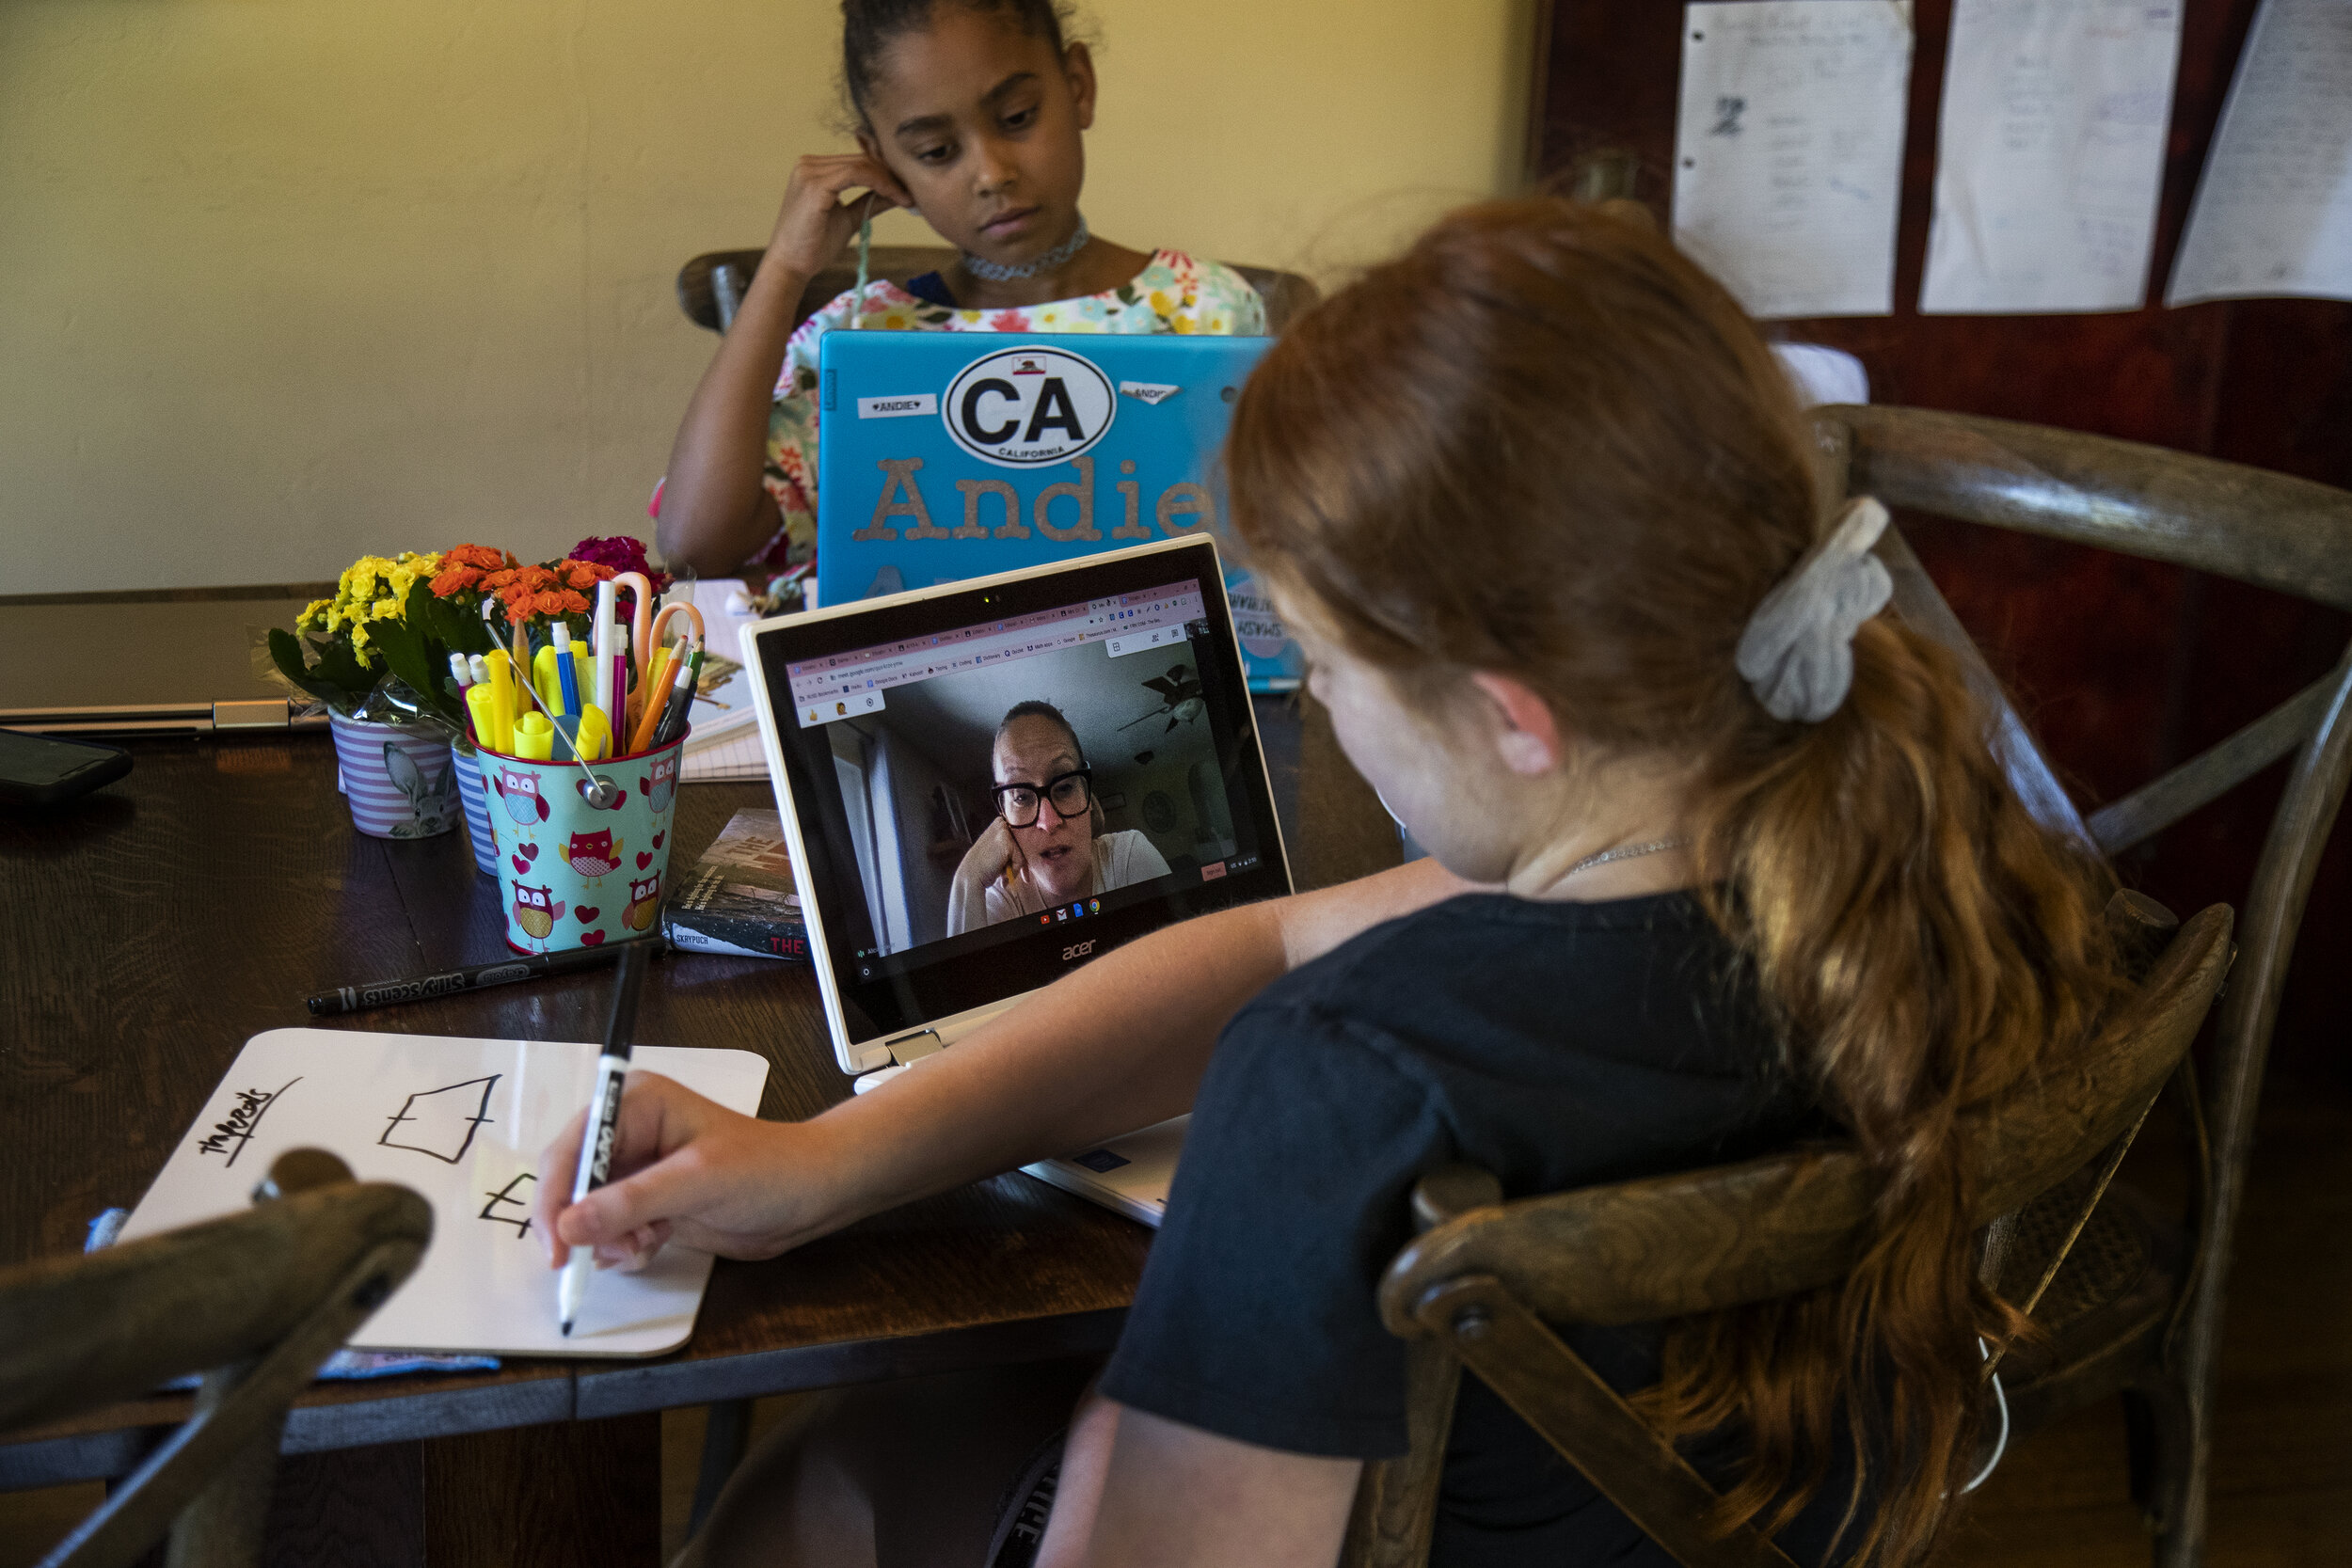  RIVERSIDE, CA- APRIL 16, 2020: Ellie Bristow, 11, checks in with her 5th grade teacher during a geometry class as her sister Andie, 6 works on a book report  at the kitchen table  in home schooling session during the coronavirus pandemic on April 16